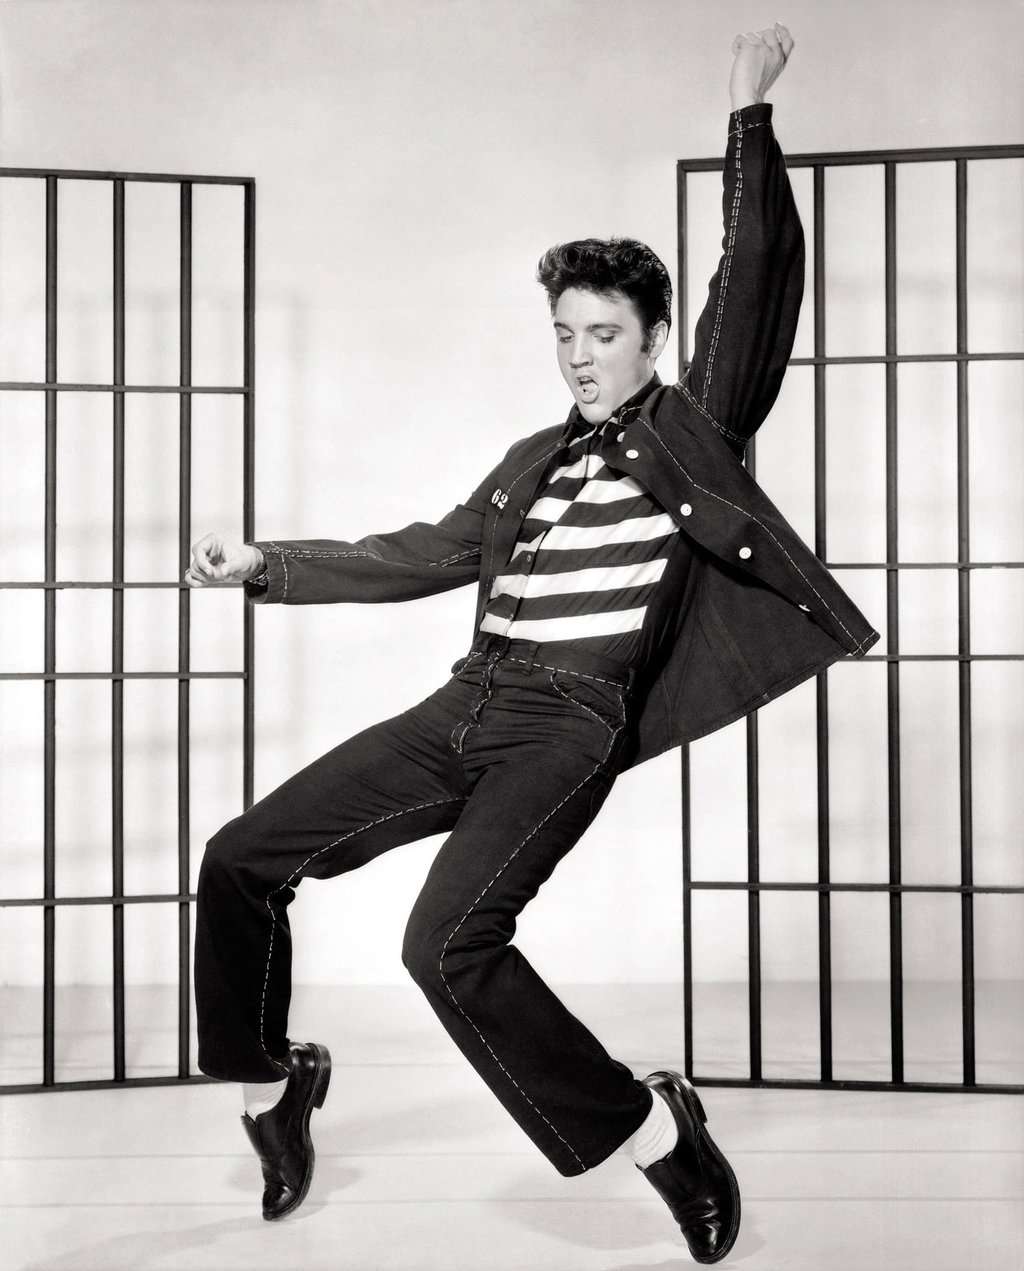 Elvis 50s: Explore the iconic career of Elvis Presley, the “King